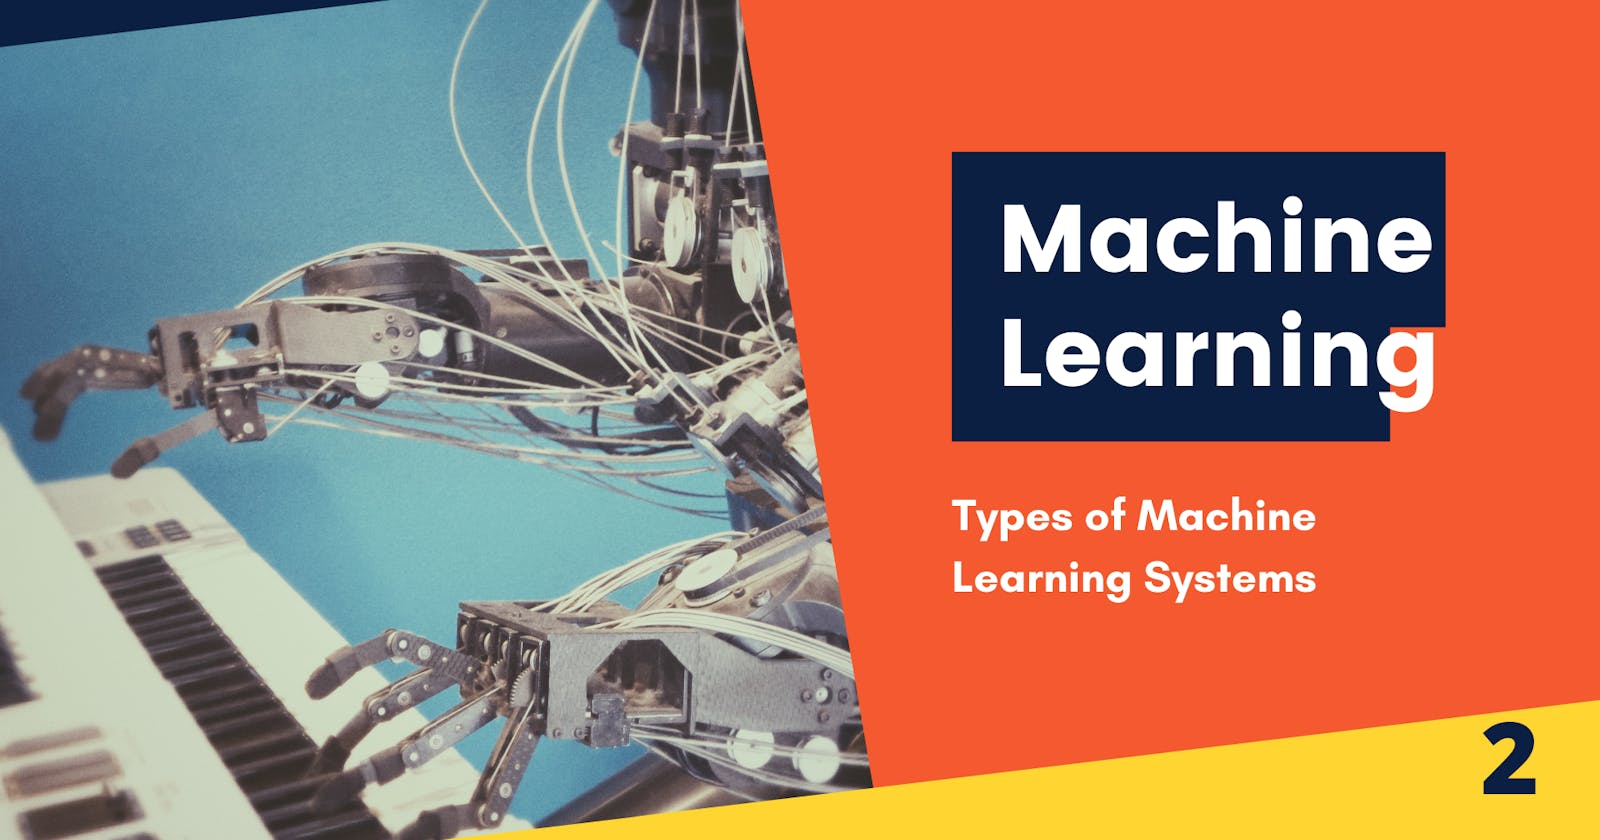 Types of Machine Learning Systems